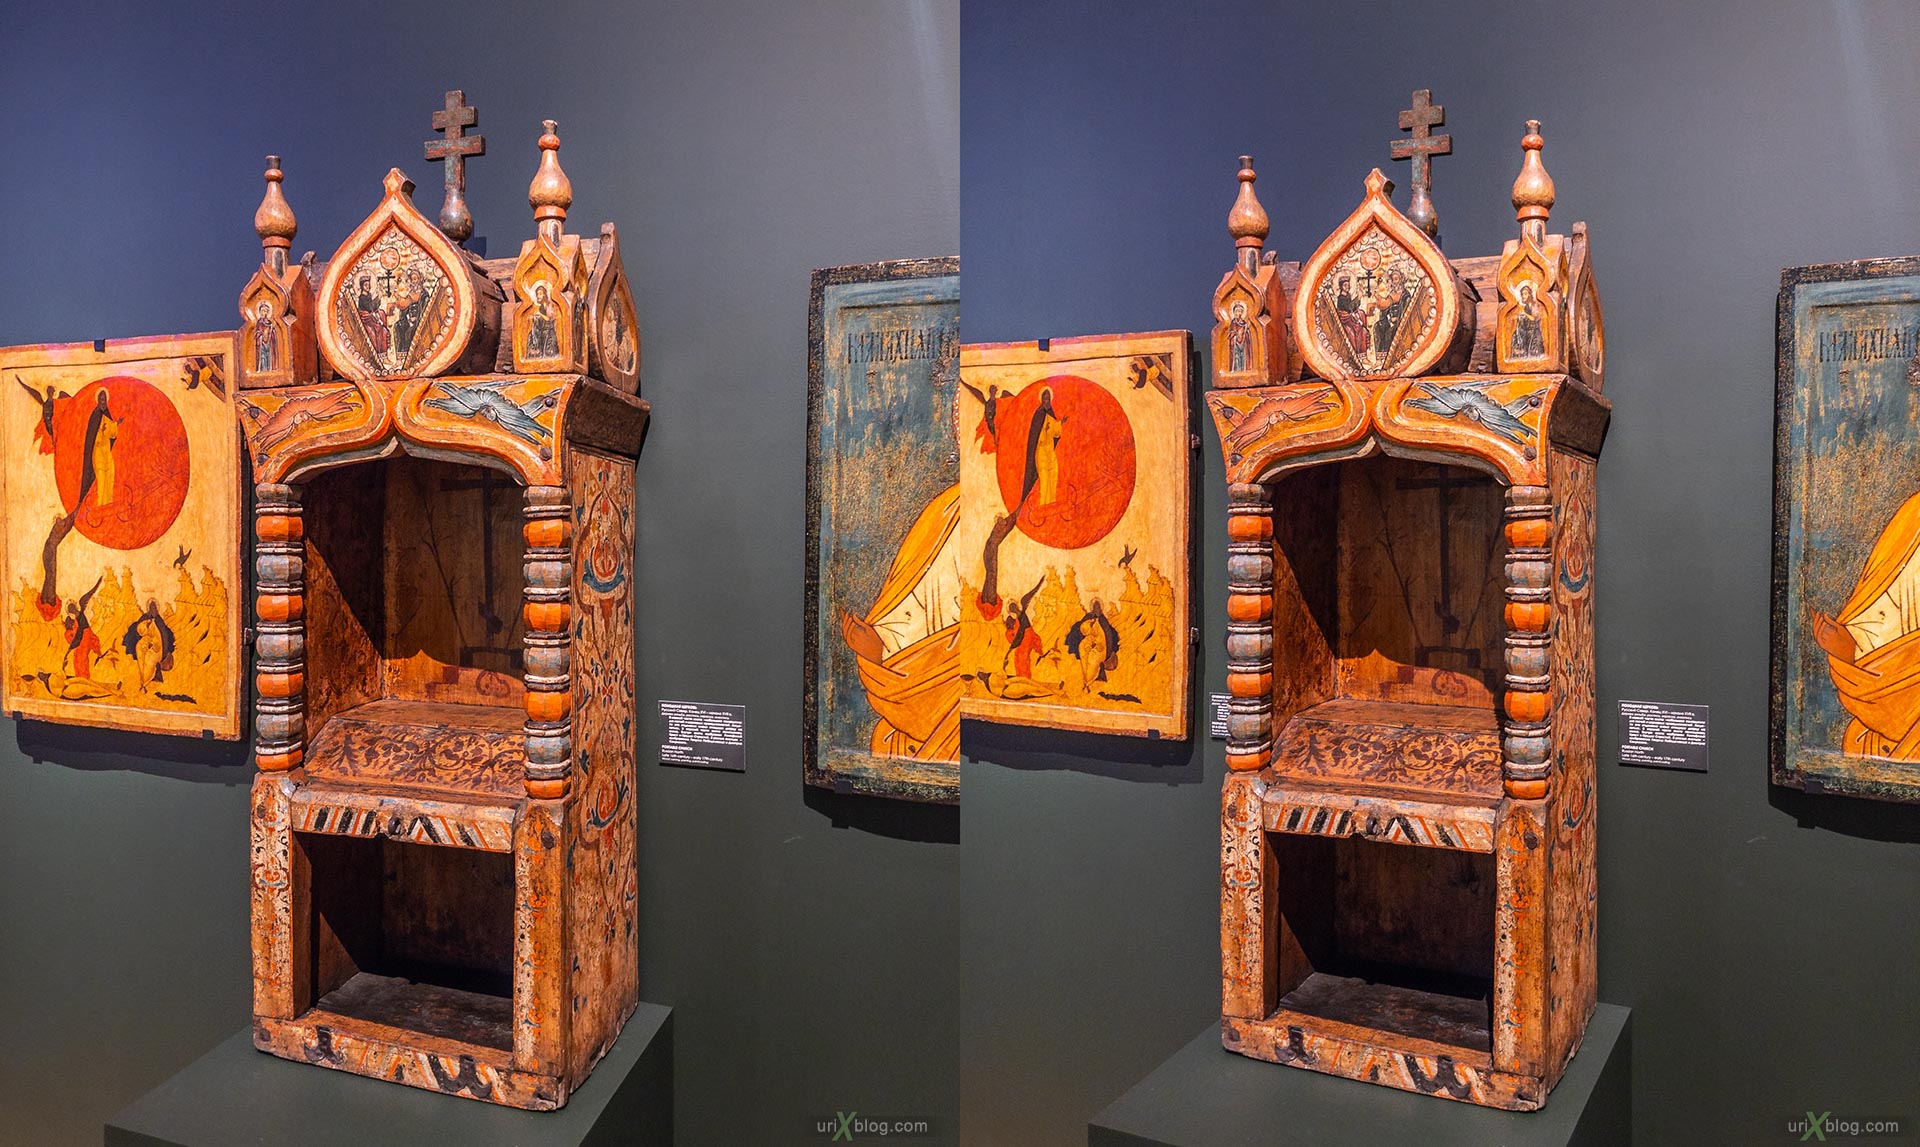 exhibition, Russian North, State Historical museum, Moscow, Russia, 3D, stereo pair, cross-eyed, crossview, cross view stereo pair, stereoscopic